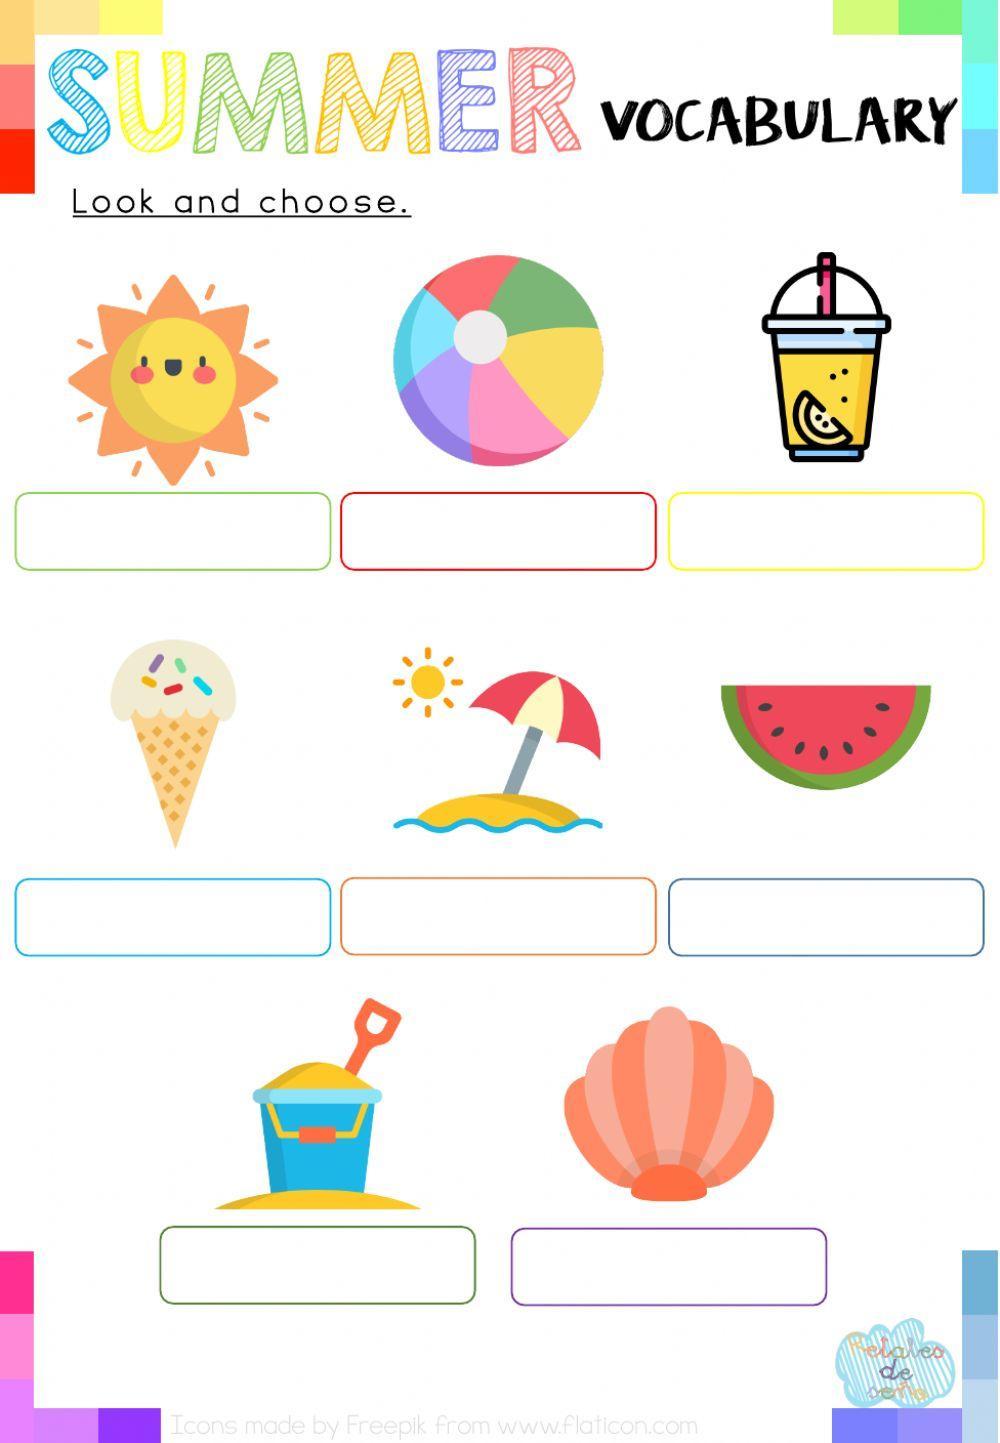 Look and choose: Summer Vocabulary